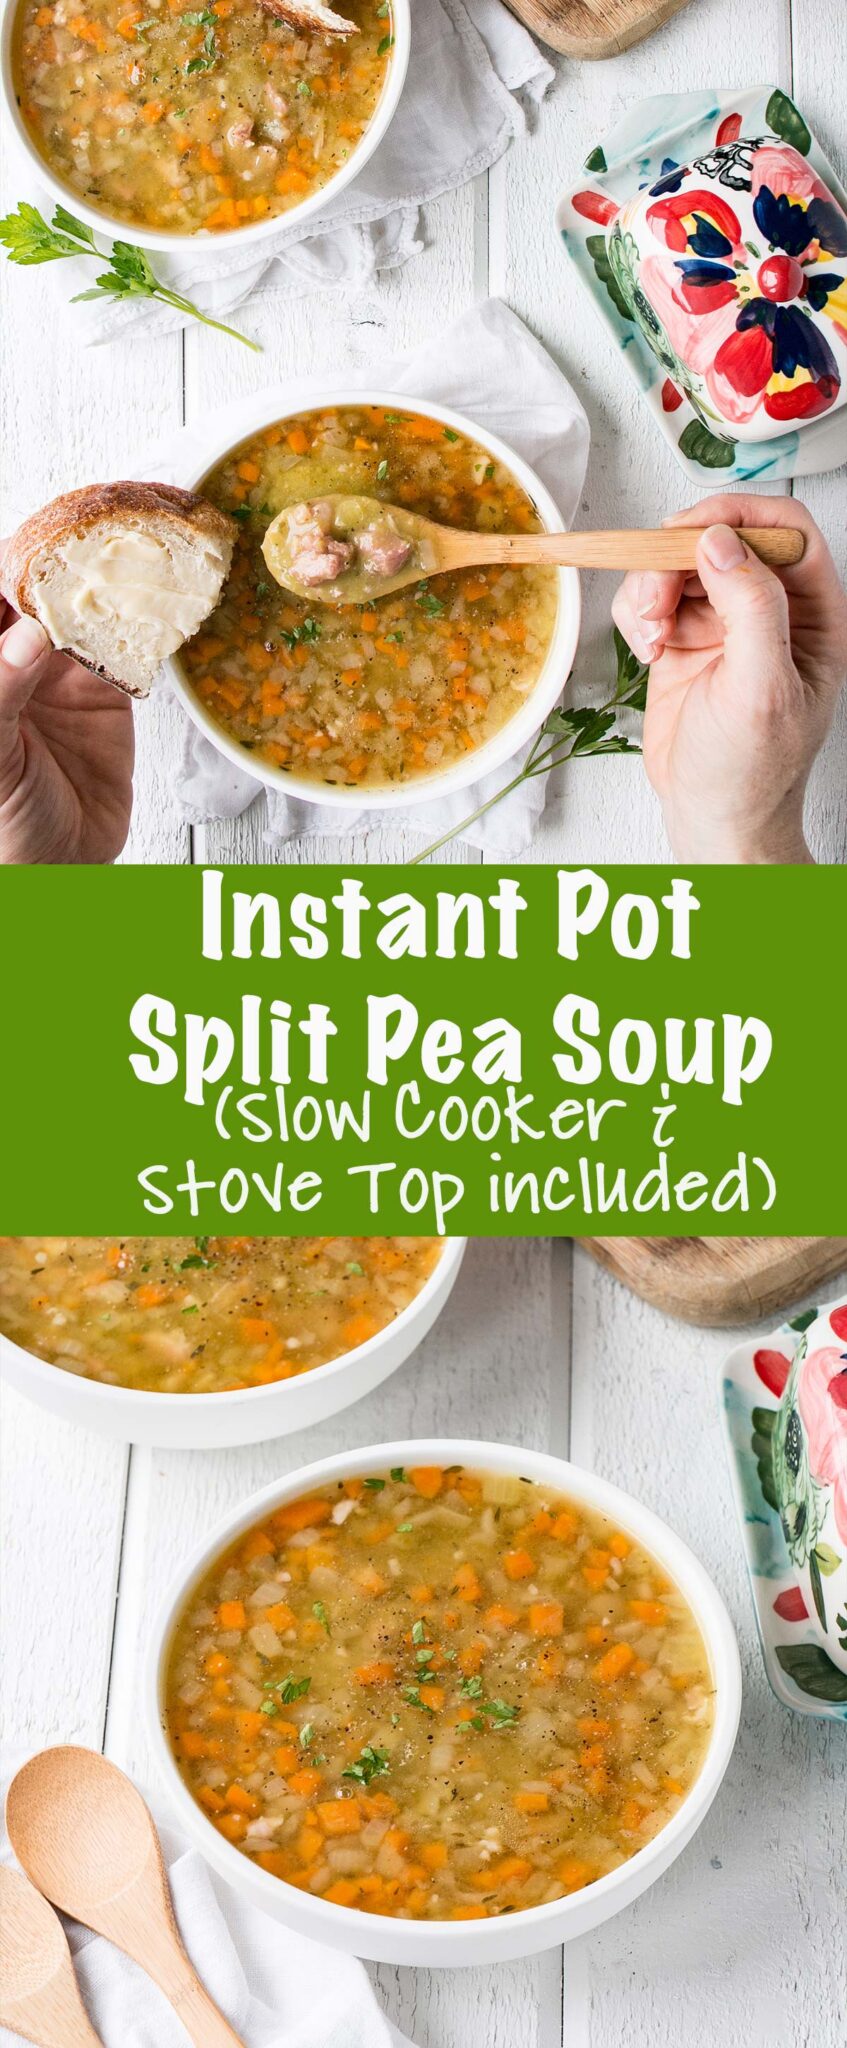 Instant Pot Split Pea Soup is made in under 35 minutes and is filled with vegetables and healthy split peas. #instantpot #soup